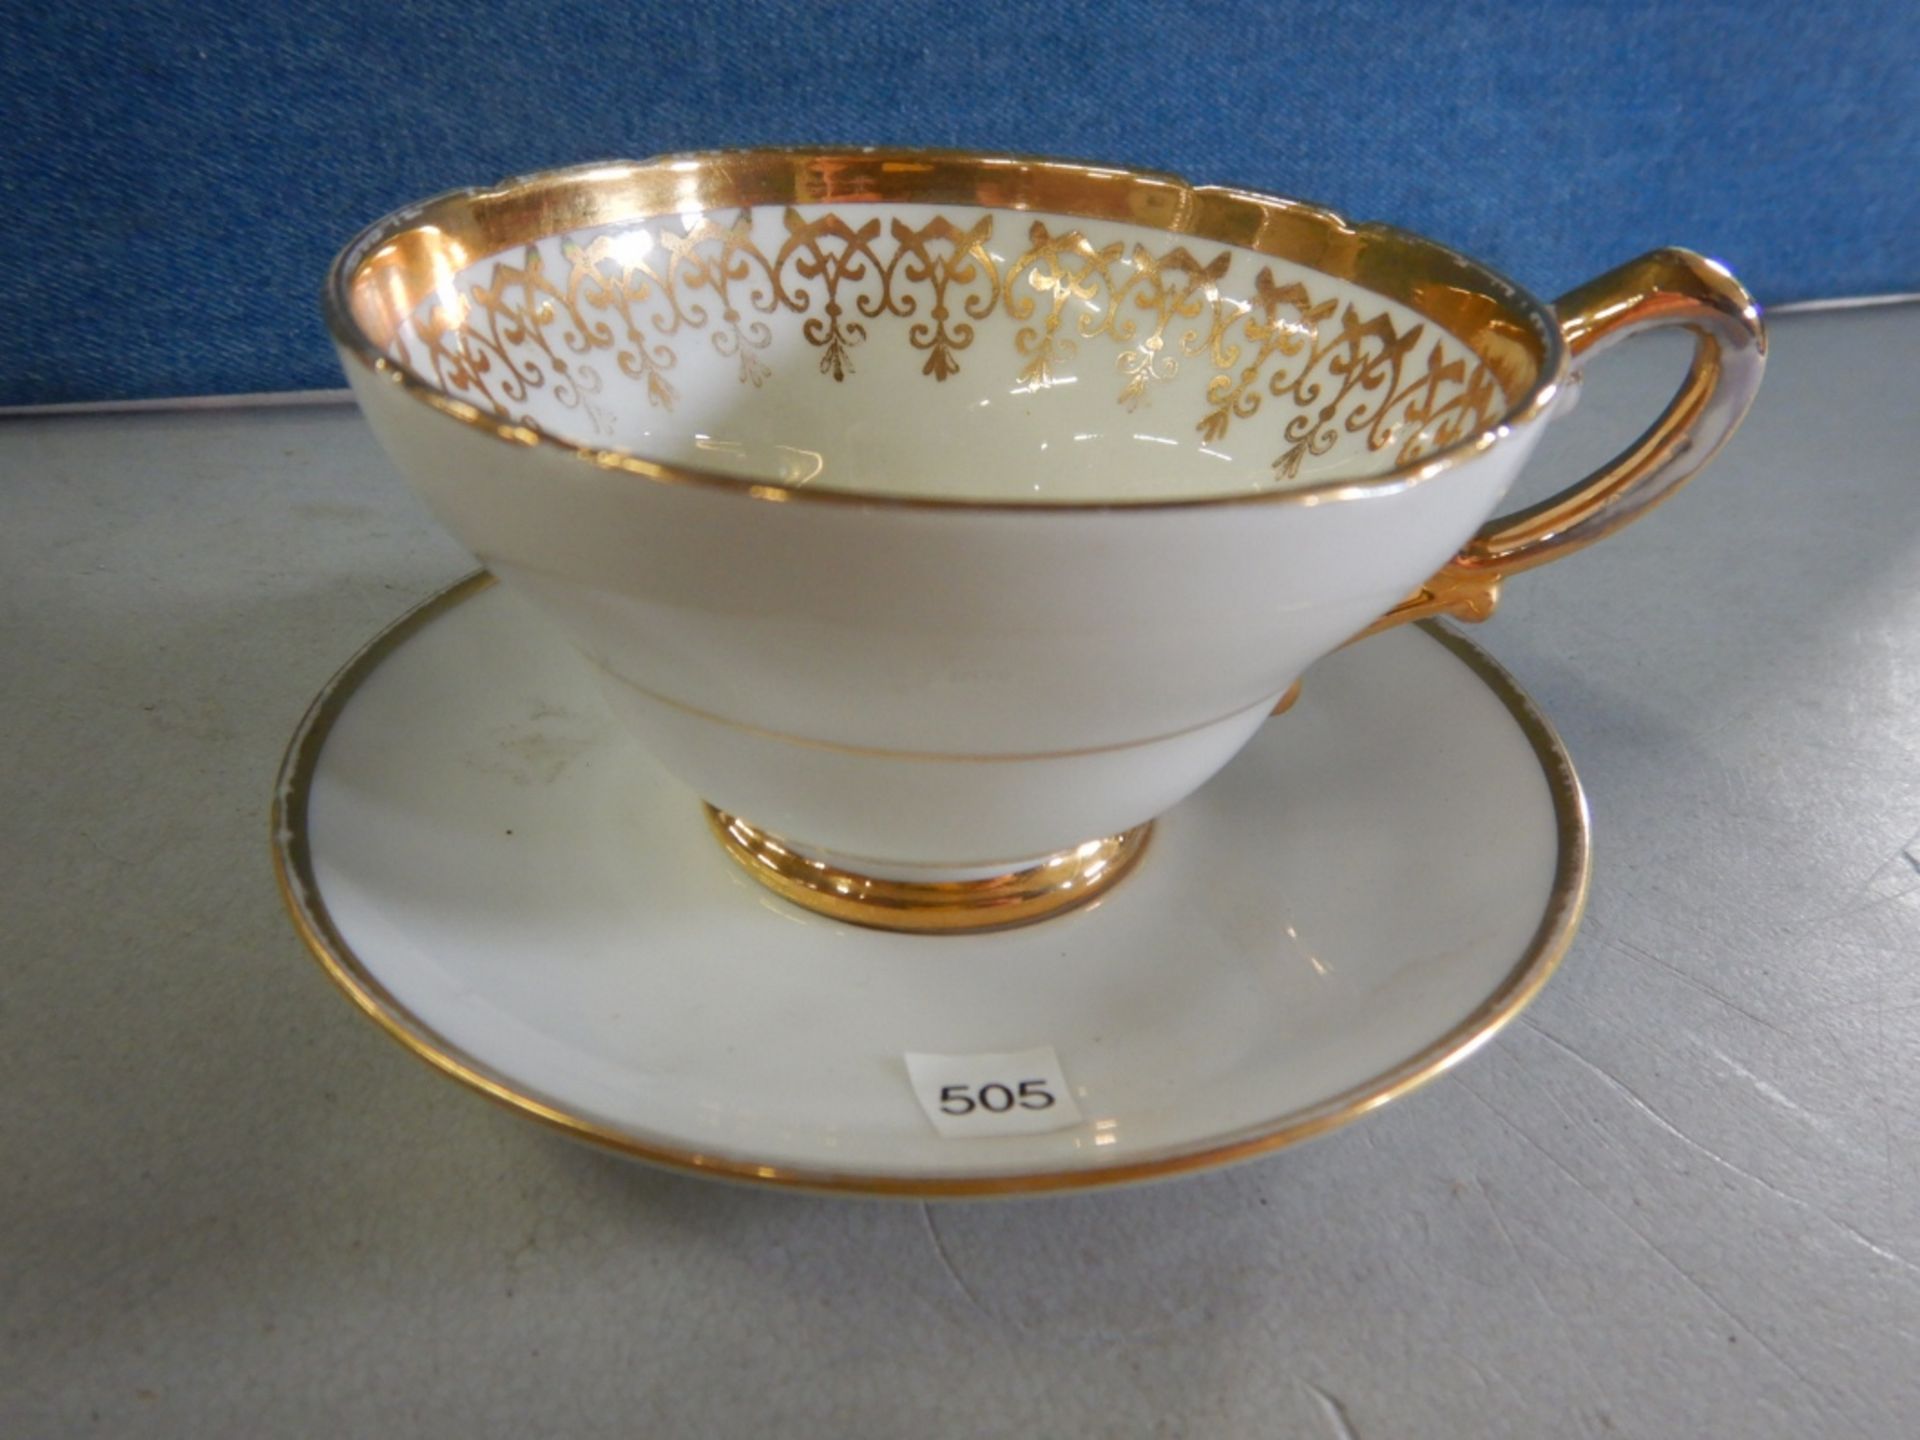 ANTIQUE TEACUPS & SAUCERS - MADE IN ENGLAND - LOT OF 2 - FINE BONE CHINA EST. 1875 "STANLEY" - - Image 8 of 13